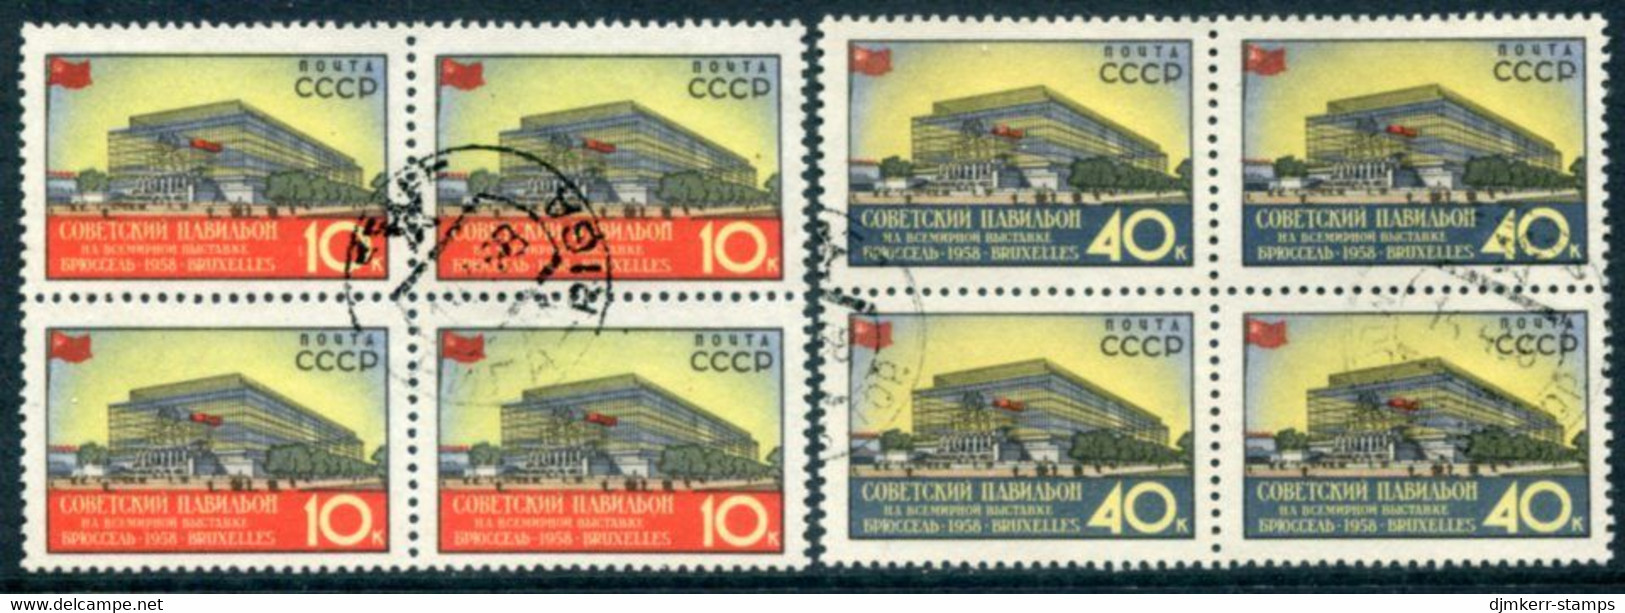 SOVIET UNION 1958 World Exhibition Perforated Blocks Of 4 Used .  Michel 2068-69 A - Gebraucht